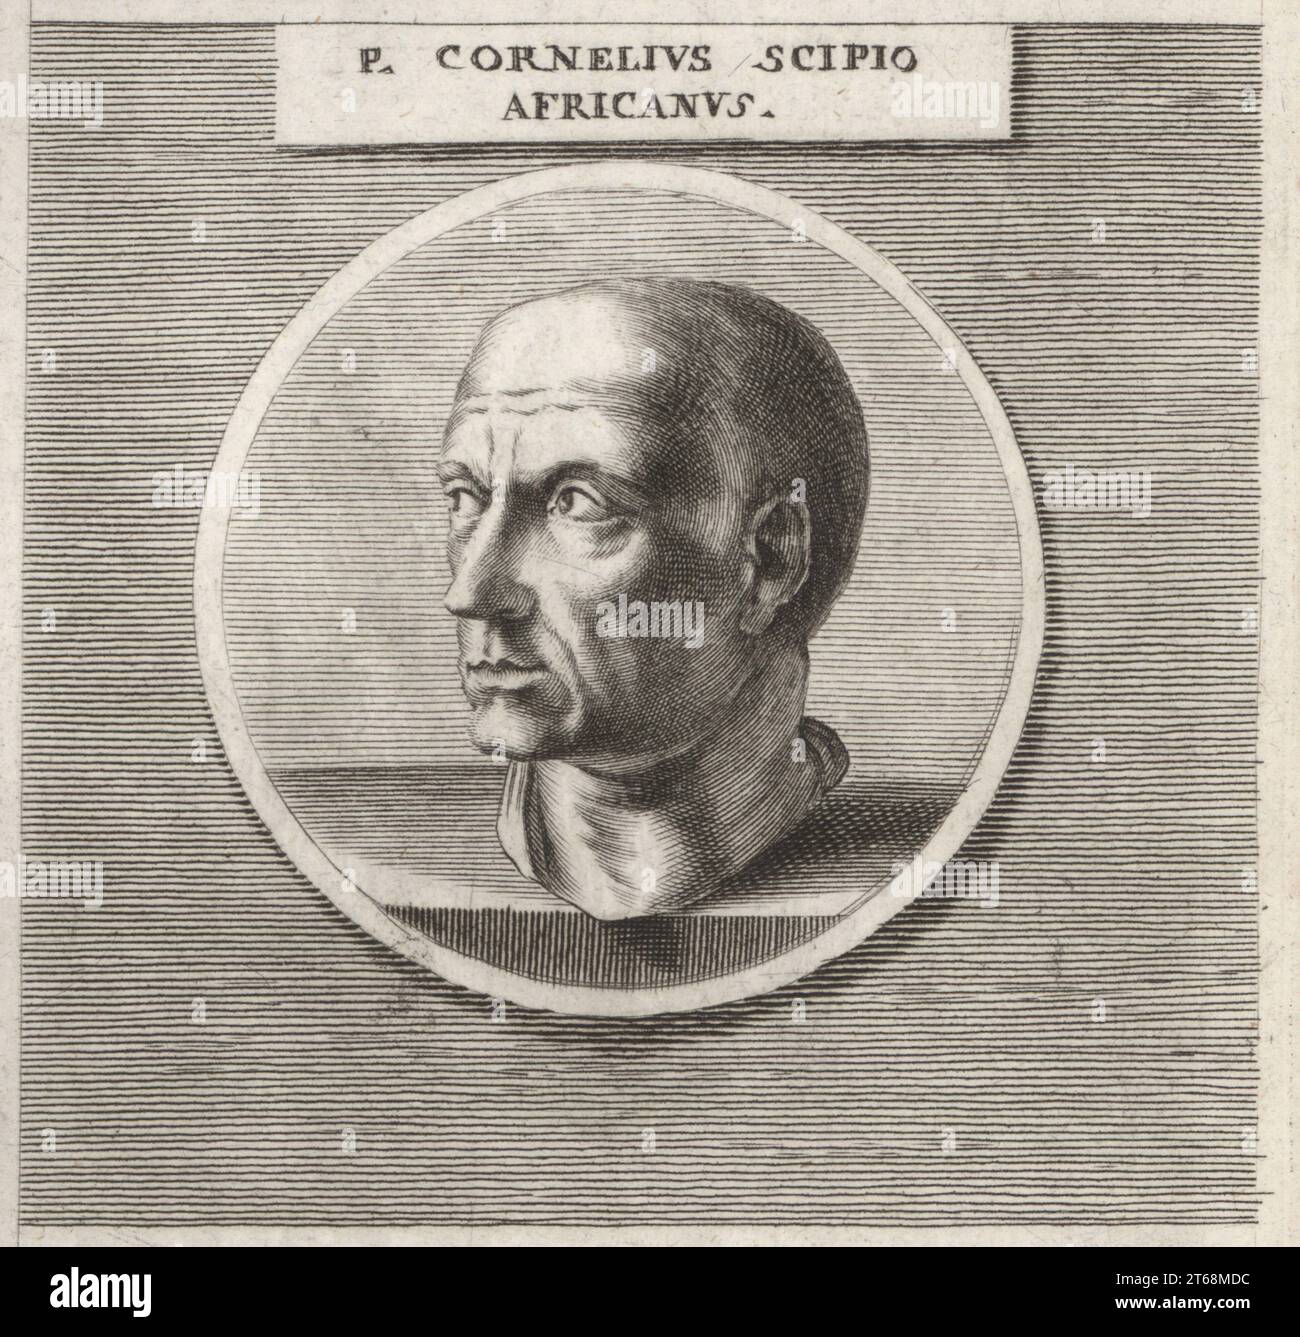 Publius Cornelius Scipio Africanus, Roman general and politician, 236-183 BC. Led Rome to victory against Carthage in the Second Punic War and defeated Hannibal at the Battle of Zama in 202 BC. P. Cornelius Scipio Africanus. Copperplate engraving after an illustration by Joachim von Sandrart from his LAcademia Todesca, della Architectura, Scultura & Pittura, oder Teutsche Academie, der Edlen Bau- Bild- und Mahlerey-Kunste, German Academy of Architecture, Sculpture and Painting, Jacob von Sandrart, Nuremberg, 1675. Stock Photo